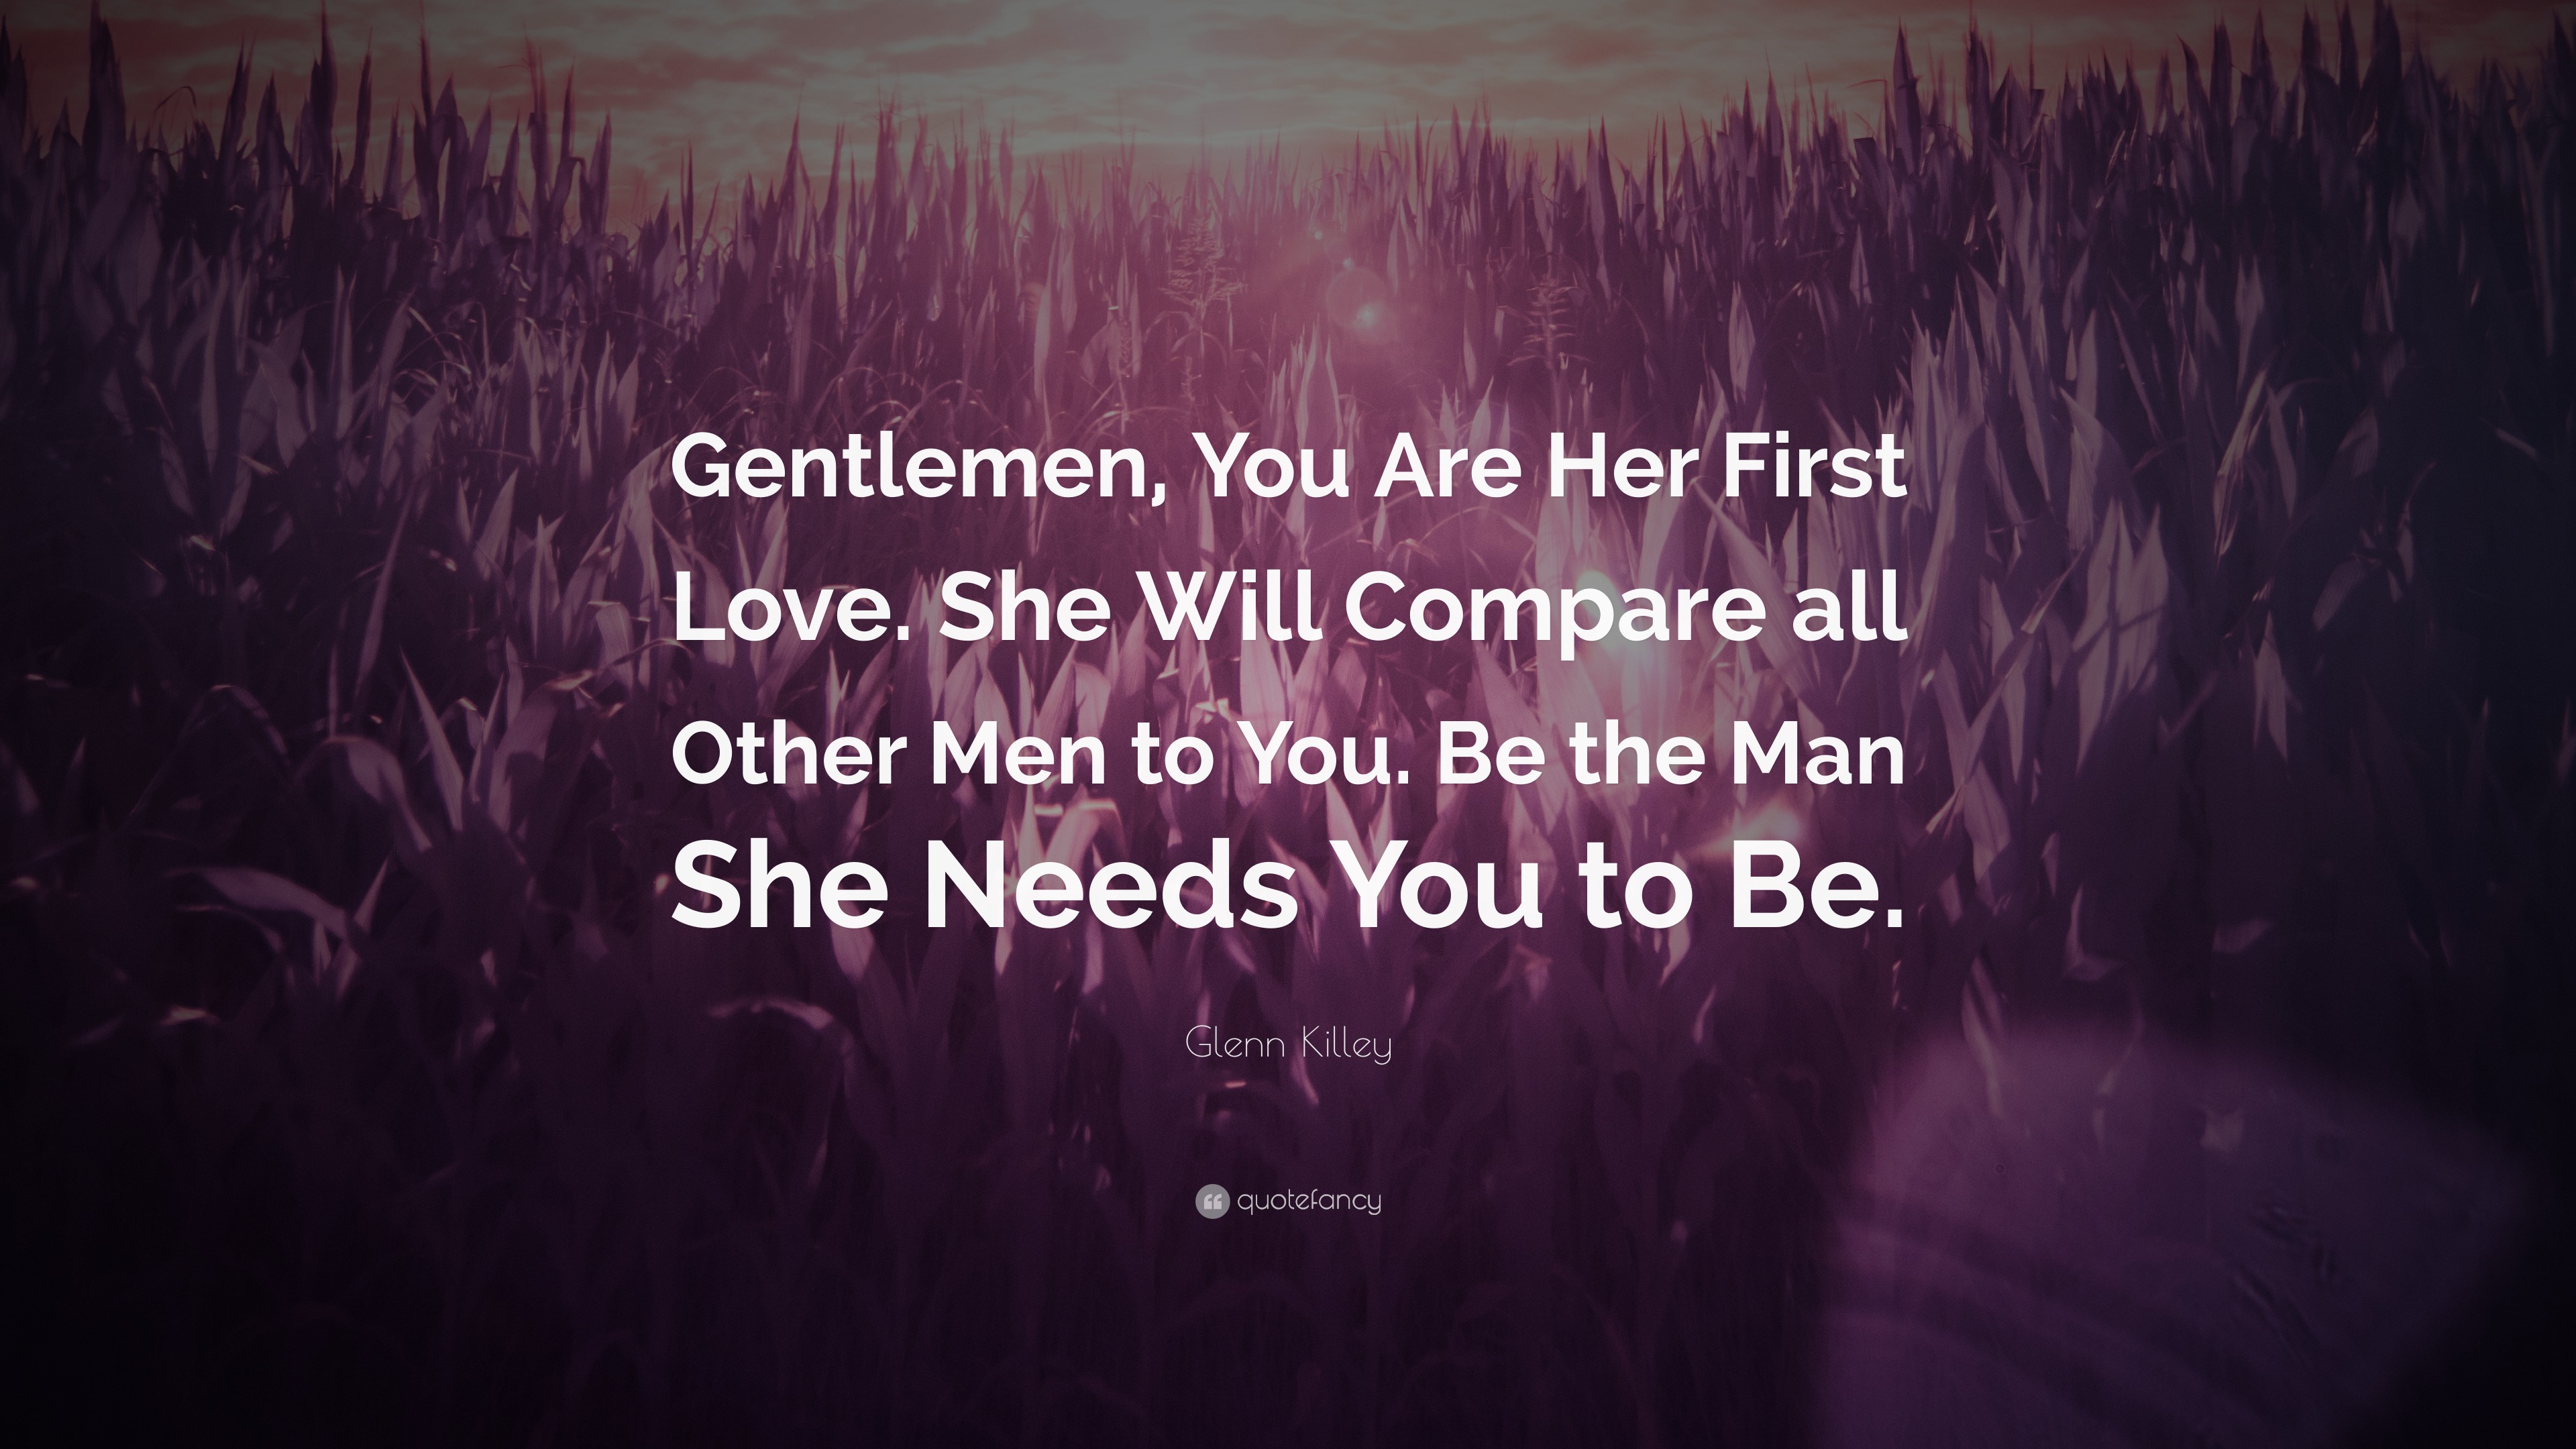 Glenn Killey Quote: “Gentlemen, You Are Her First Love. She Will ...